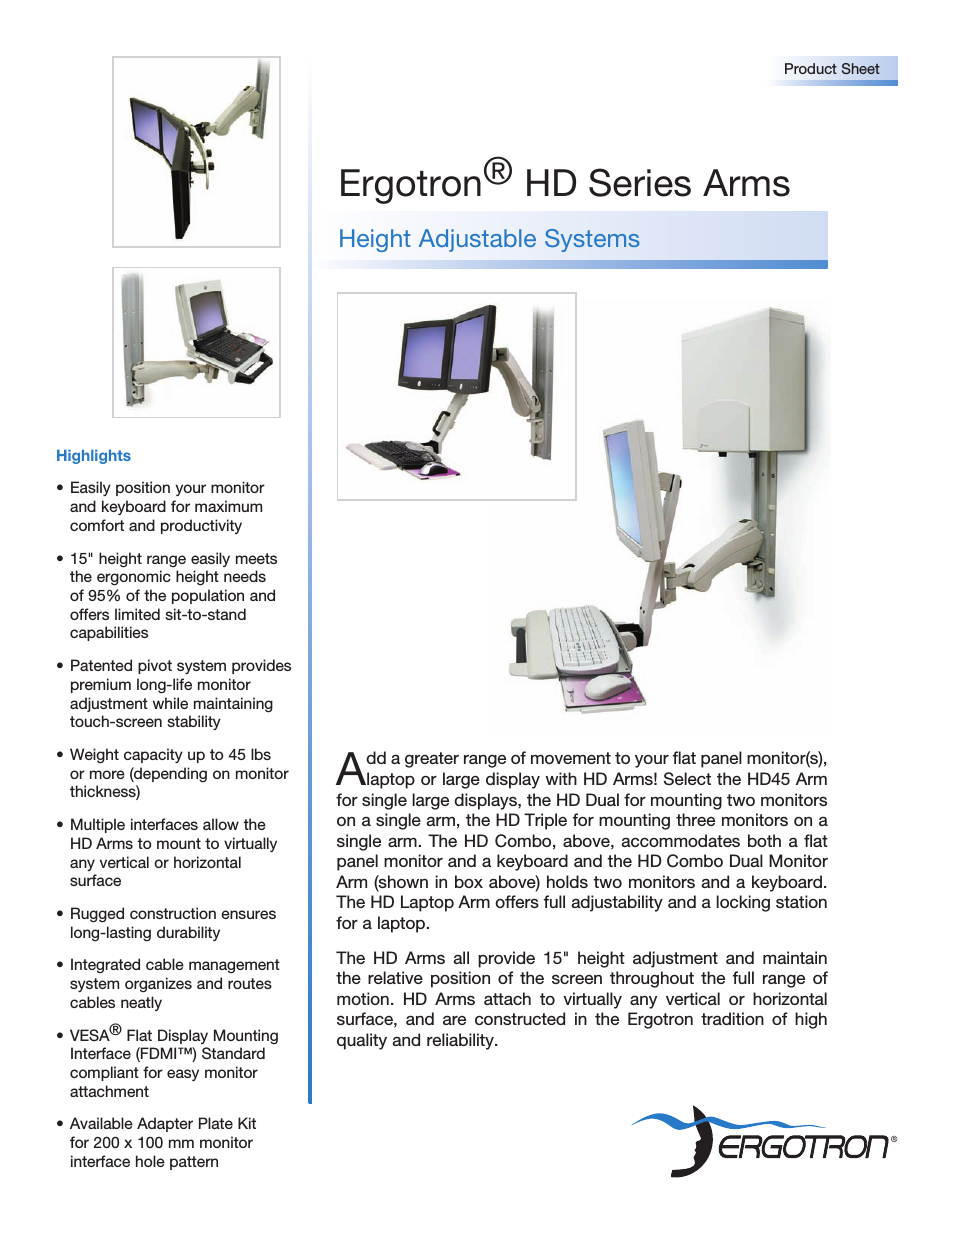 Height Adjustable Systems HD Series Arms